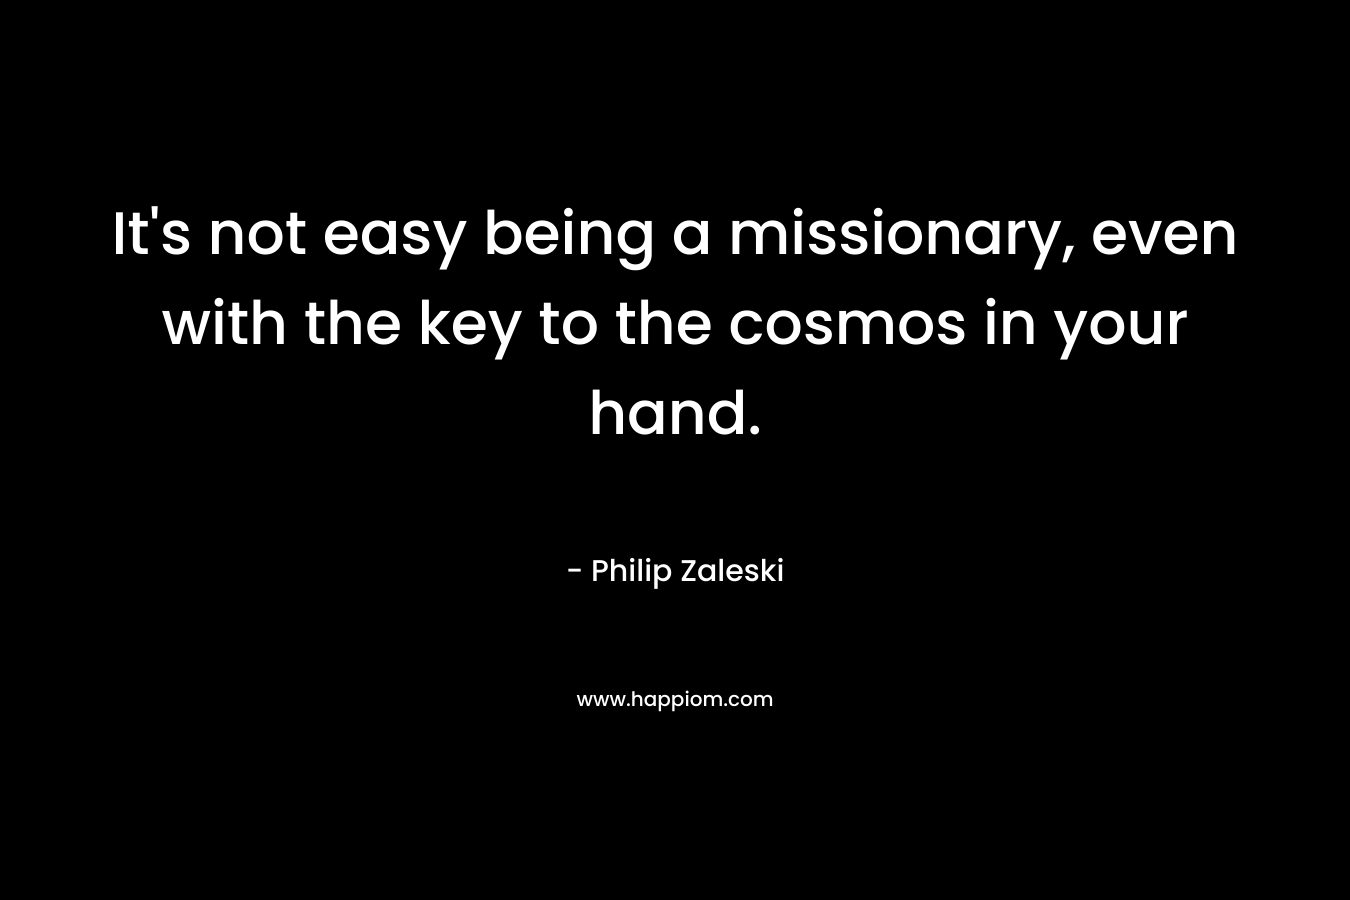 It's not easy being a missionary, even with the key to the cosmos in your hand.